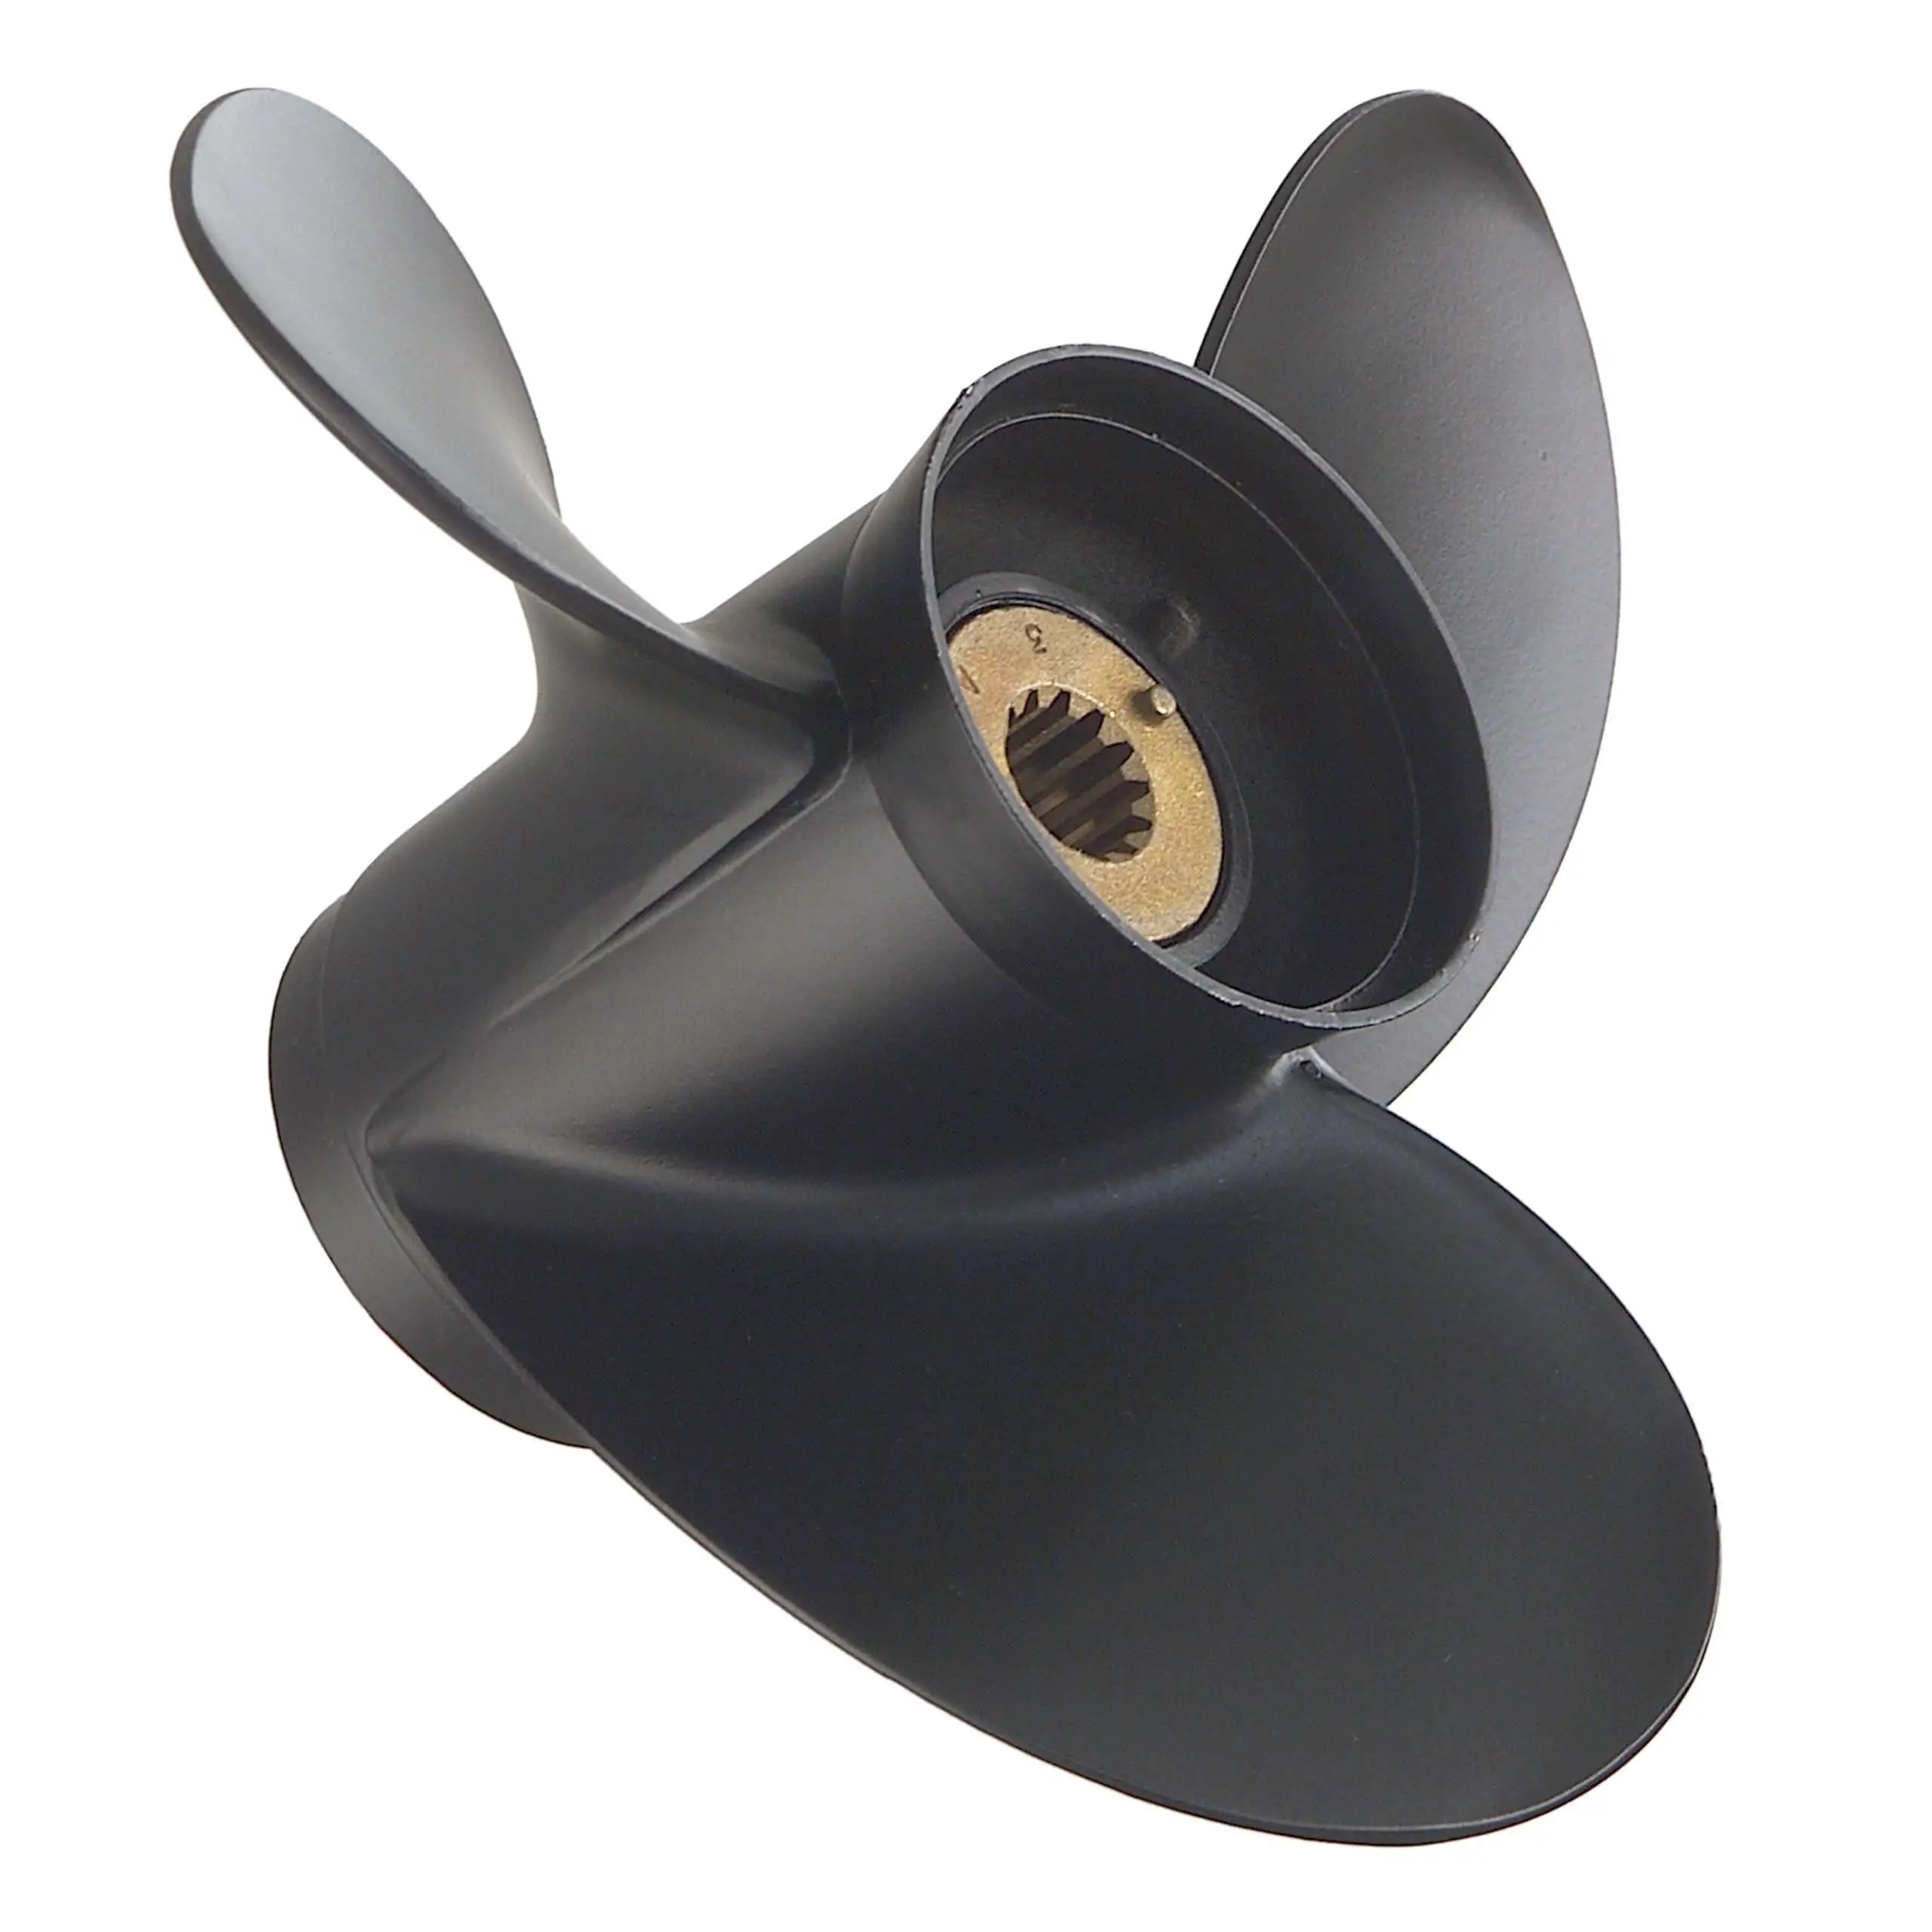 How to Choose the Right Boat Propeller